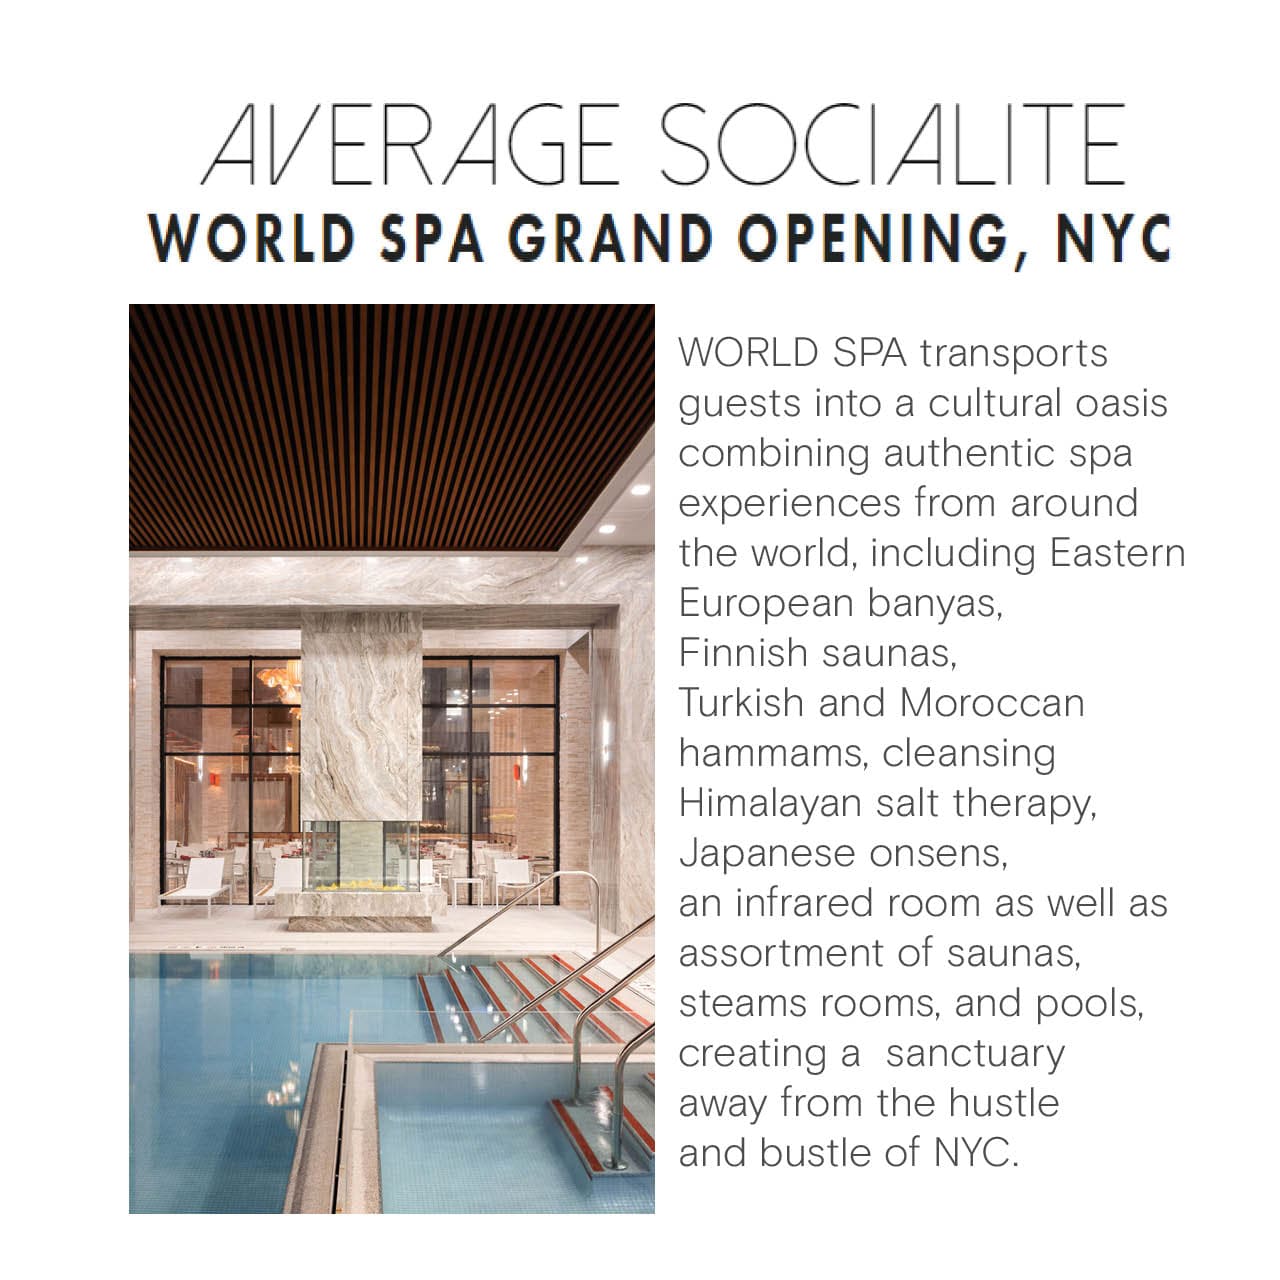 an excerpt from average socialite magazine featuring World Spa.